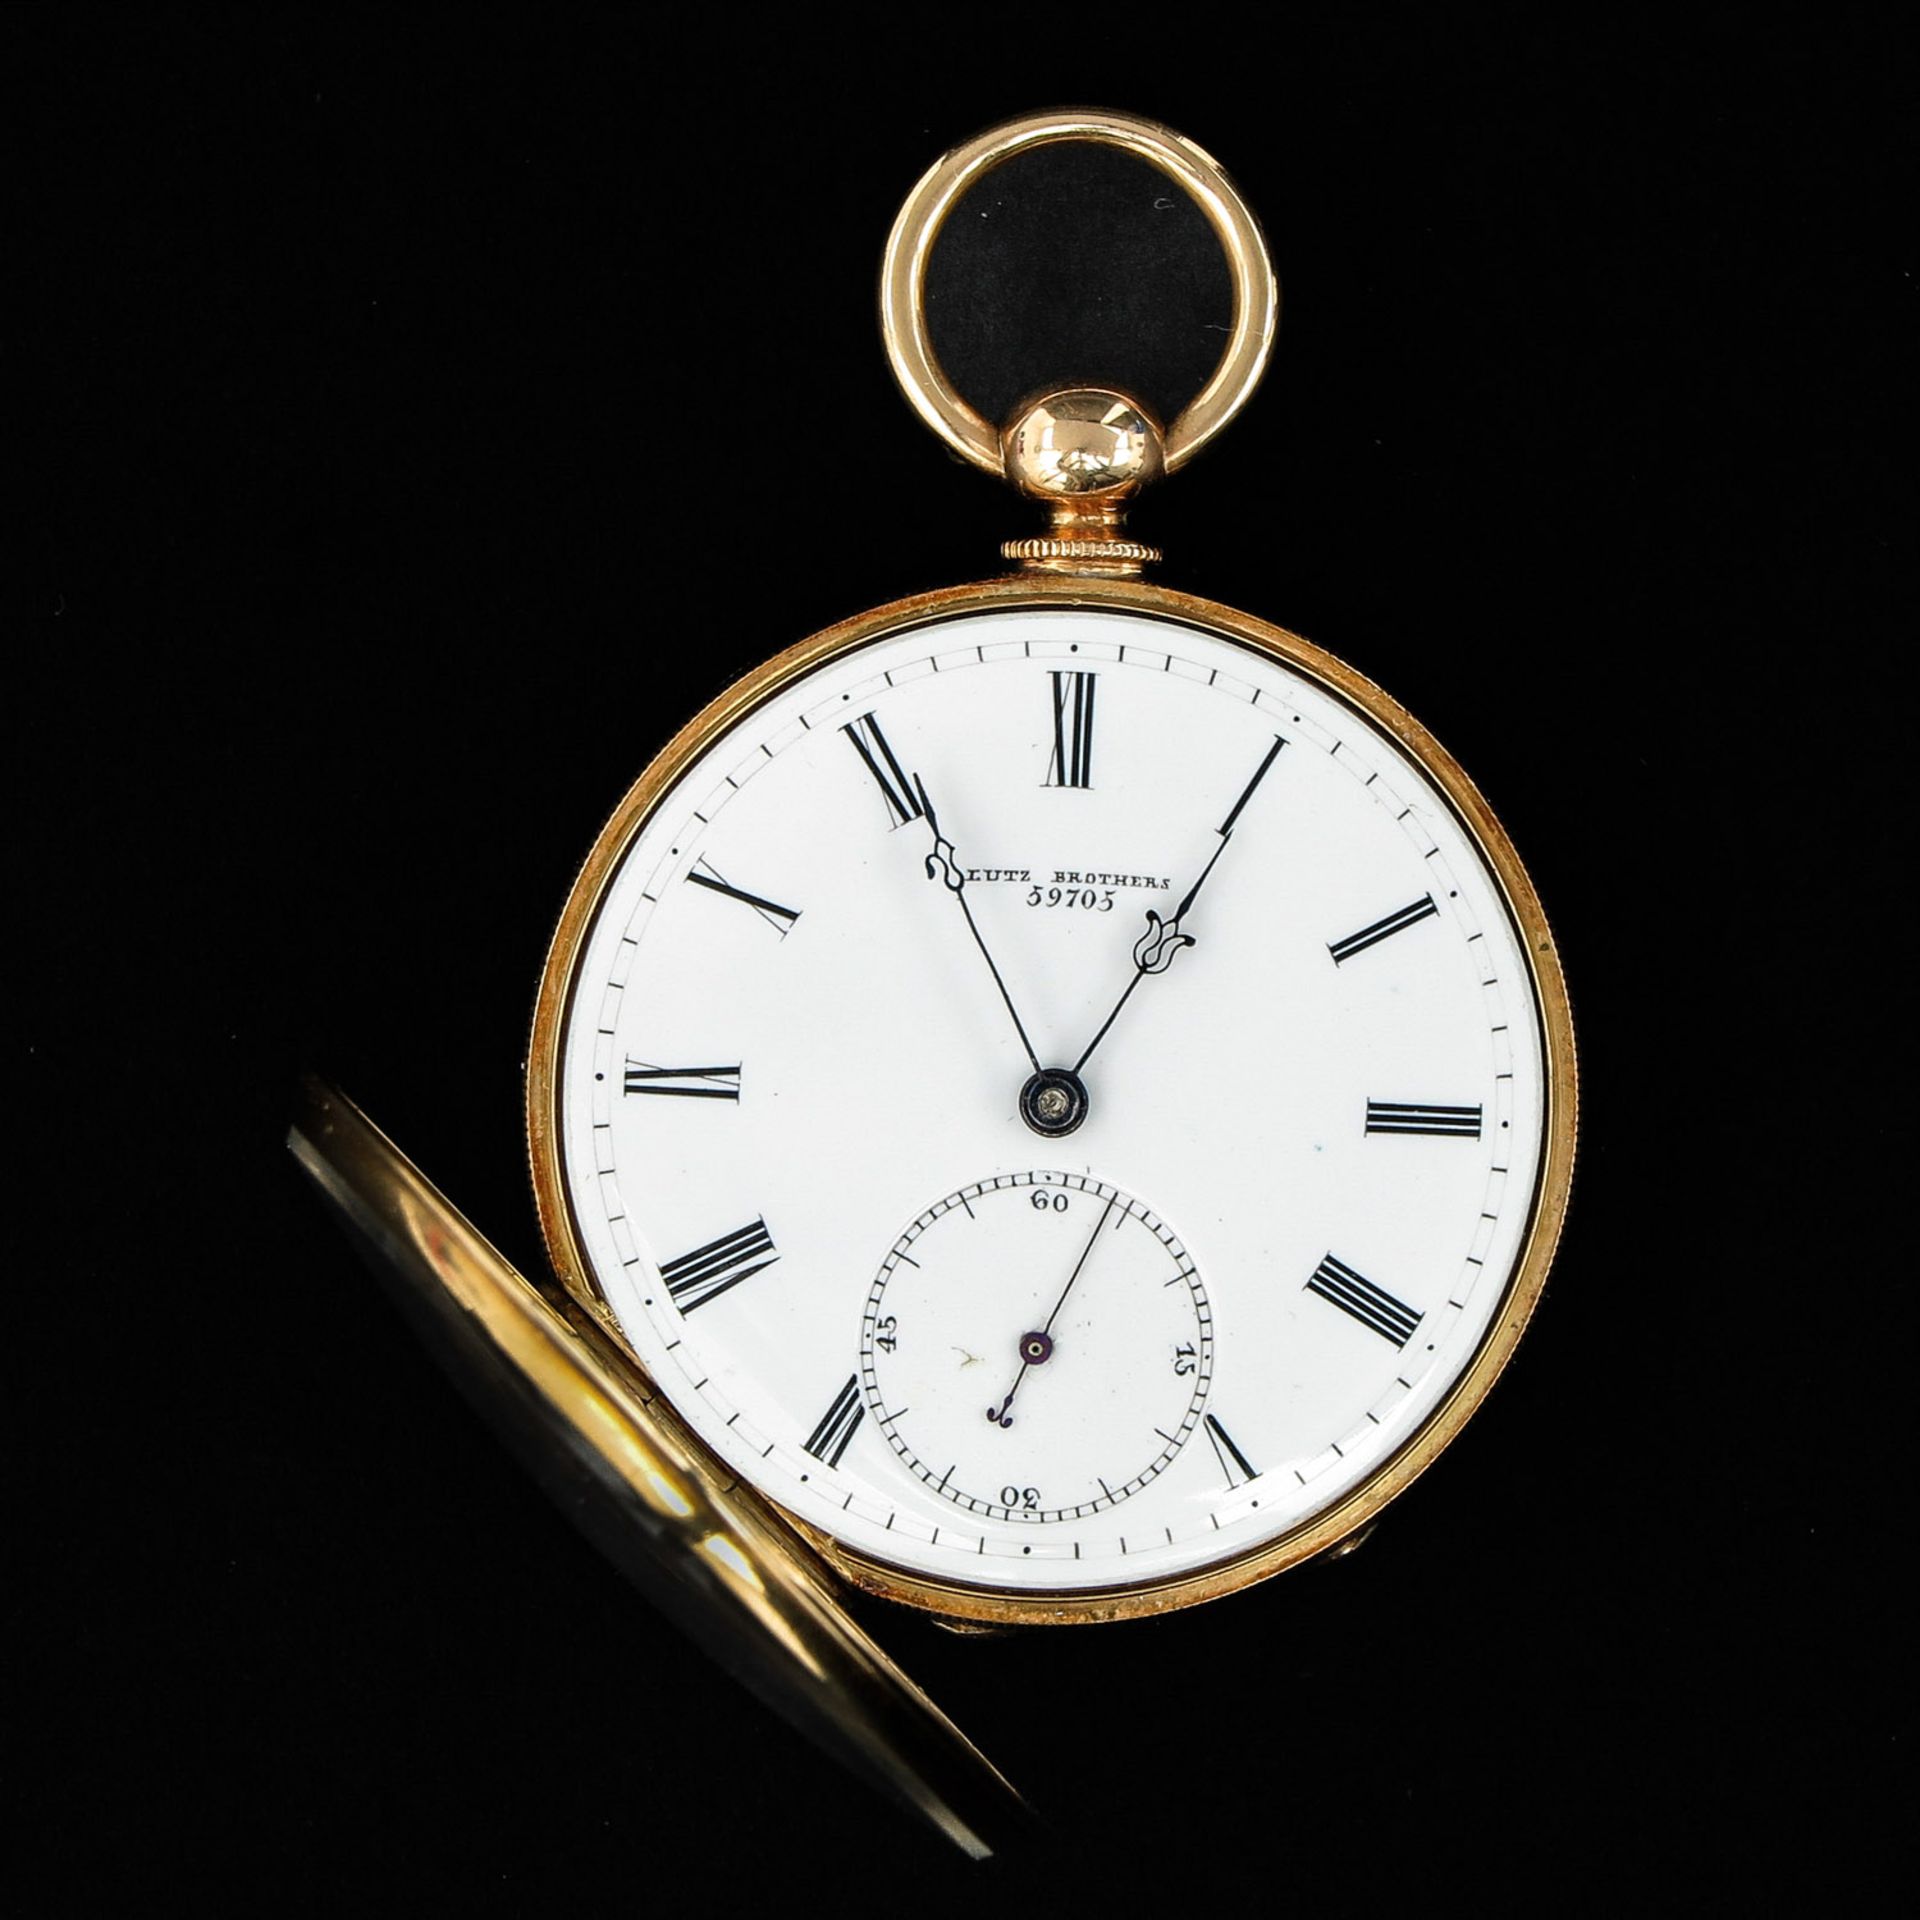 An 18KG Pocket Watch Signed Lutz Brothers - Image 3 of 7